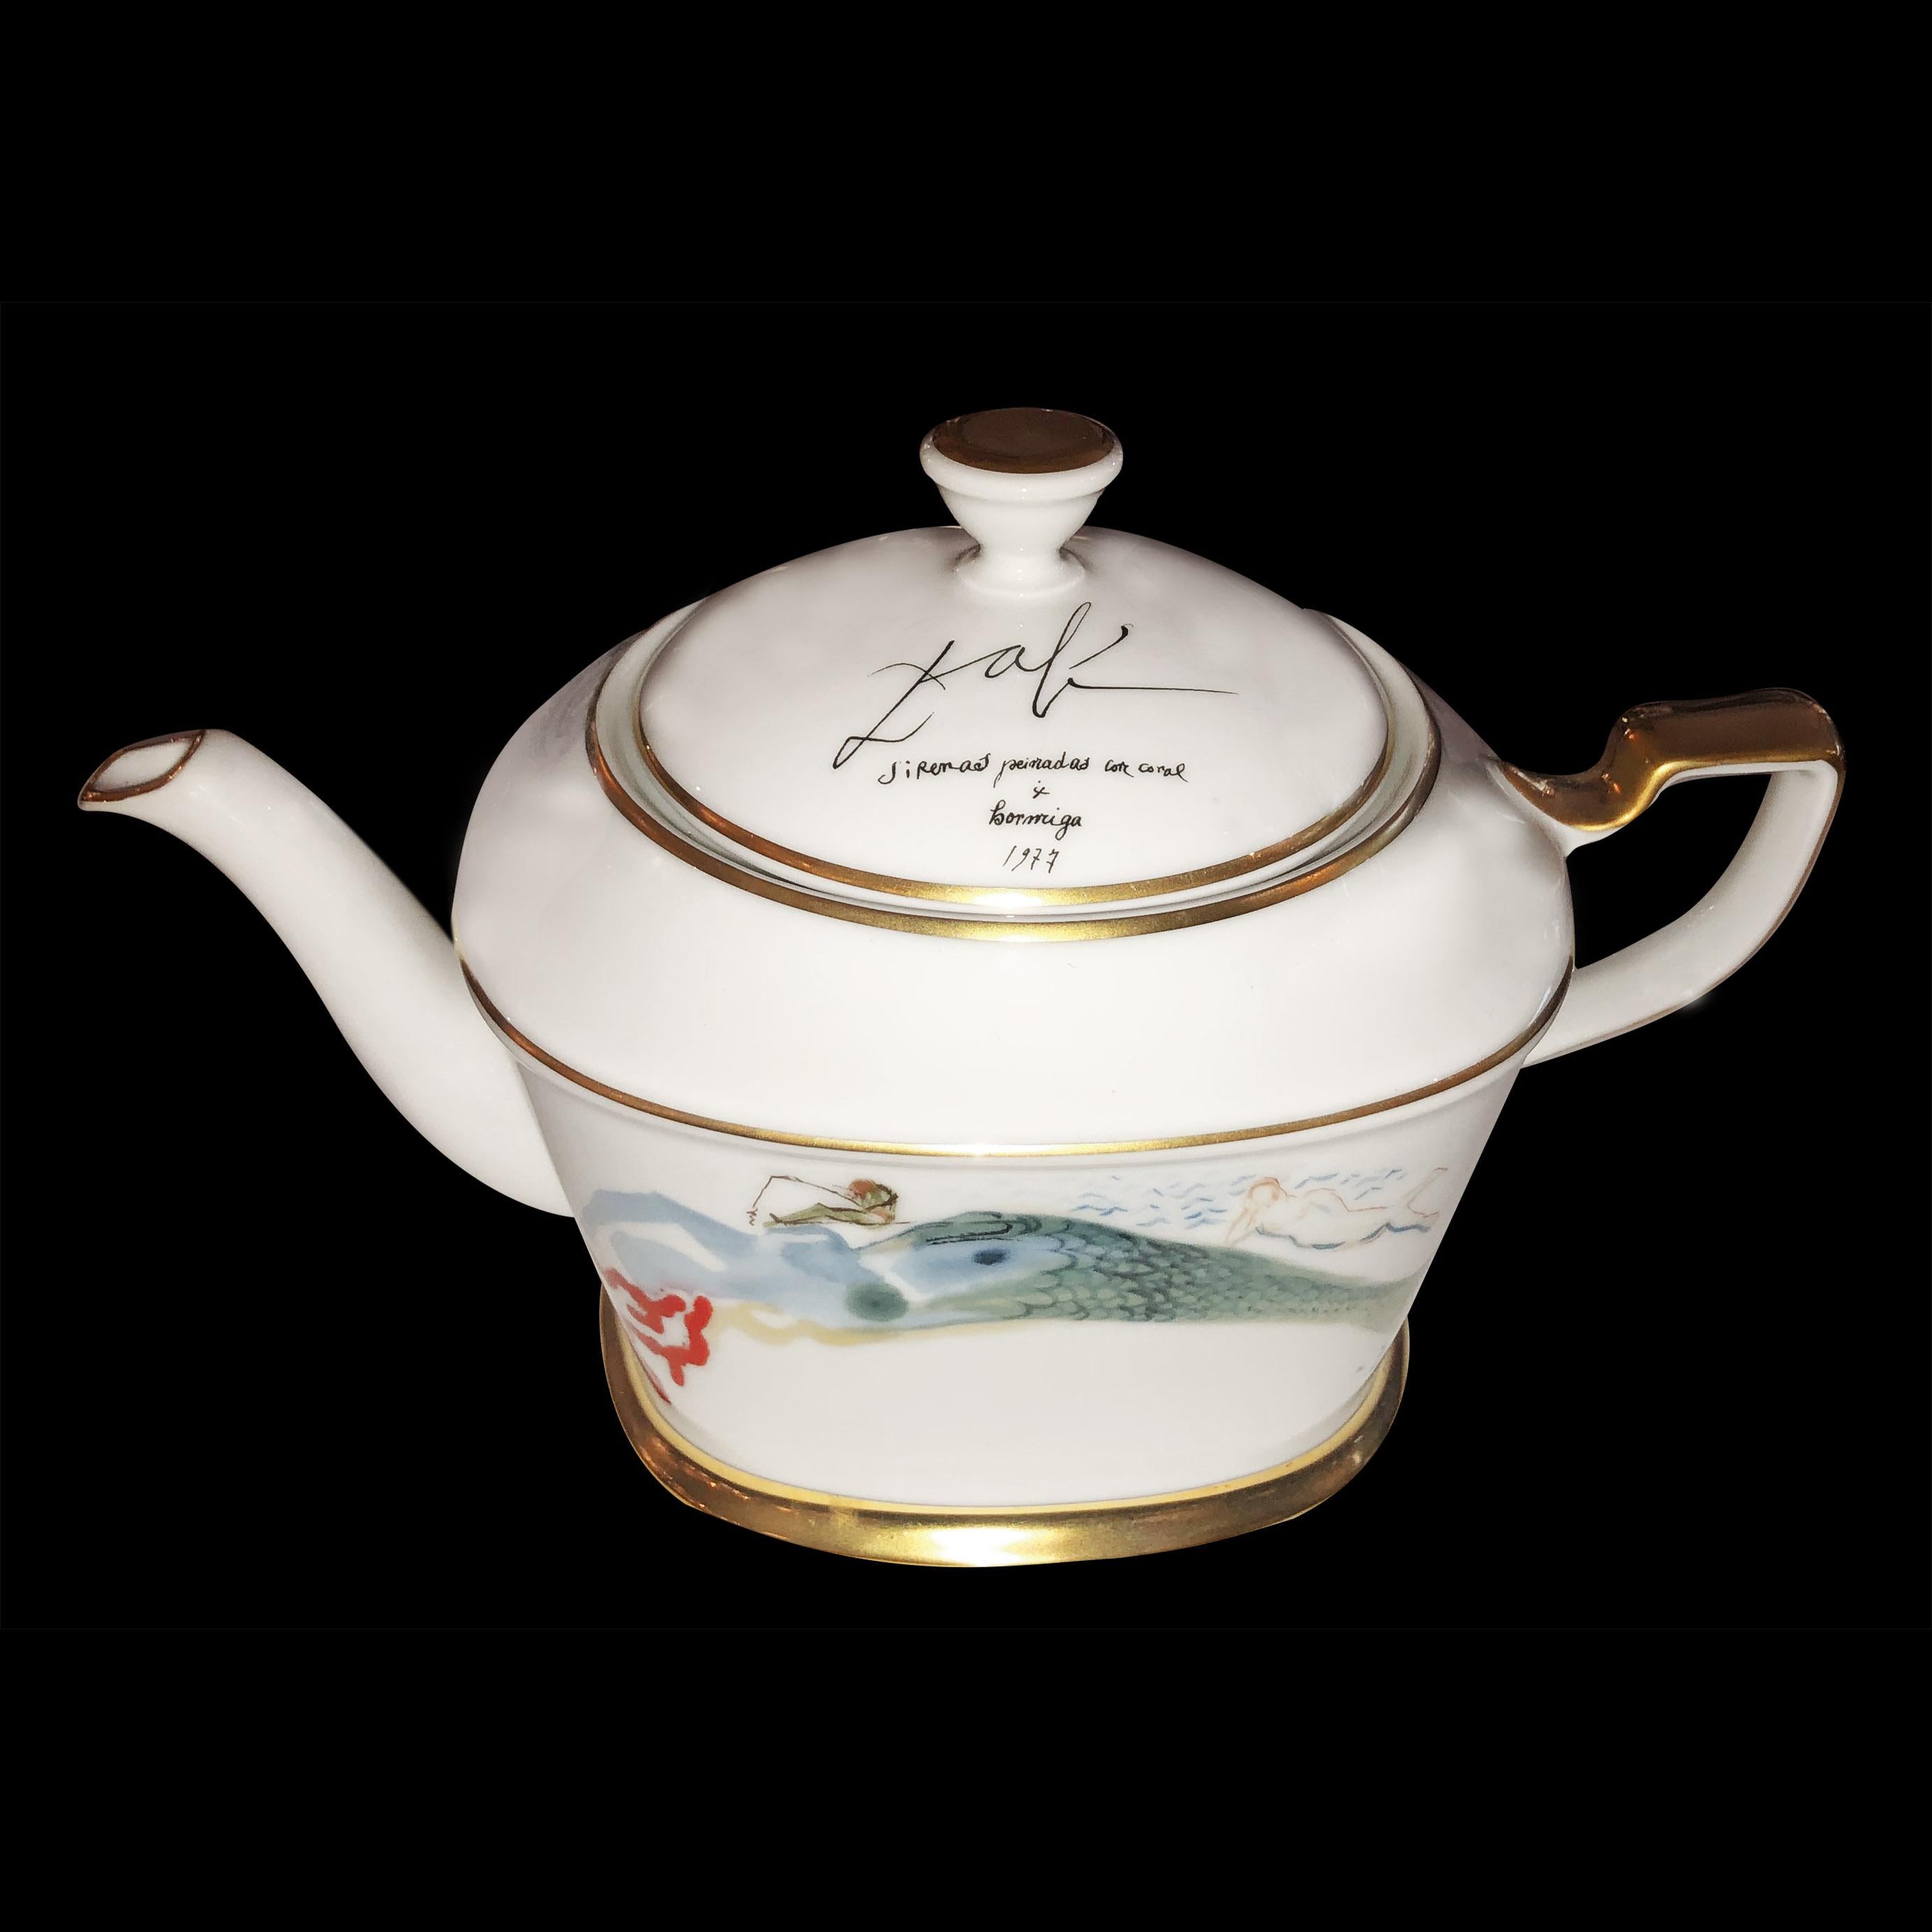 Salvador Dalí (1904-1989) world-famous Spanish painter, graphic artist, and sculptor of surrealism, designed this 1977 porcelain edition painted tea service porcelain for 8 persons with 24-karat gold trim, 
Plate signed; on front and back, and